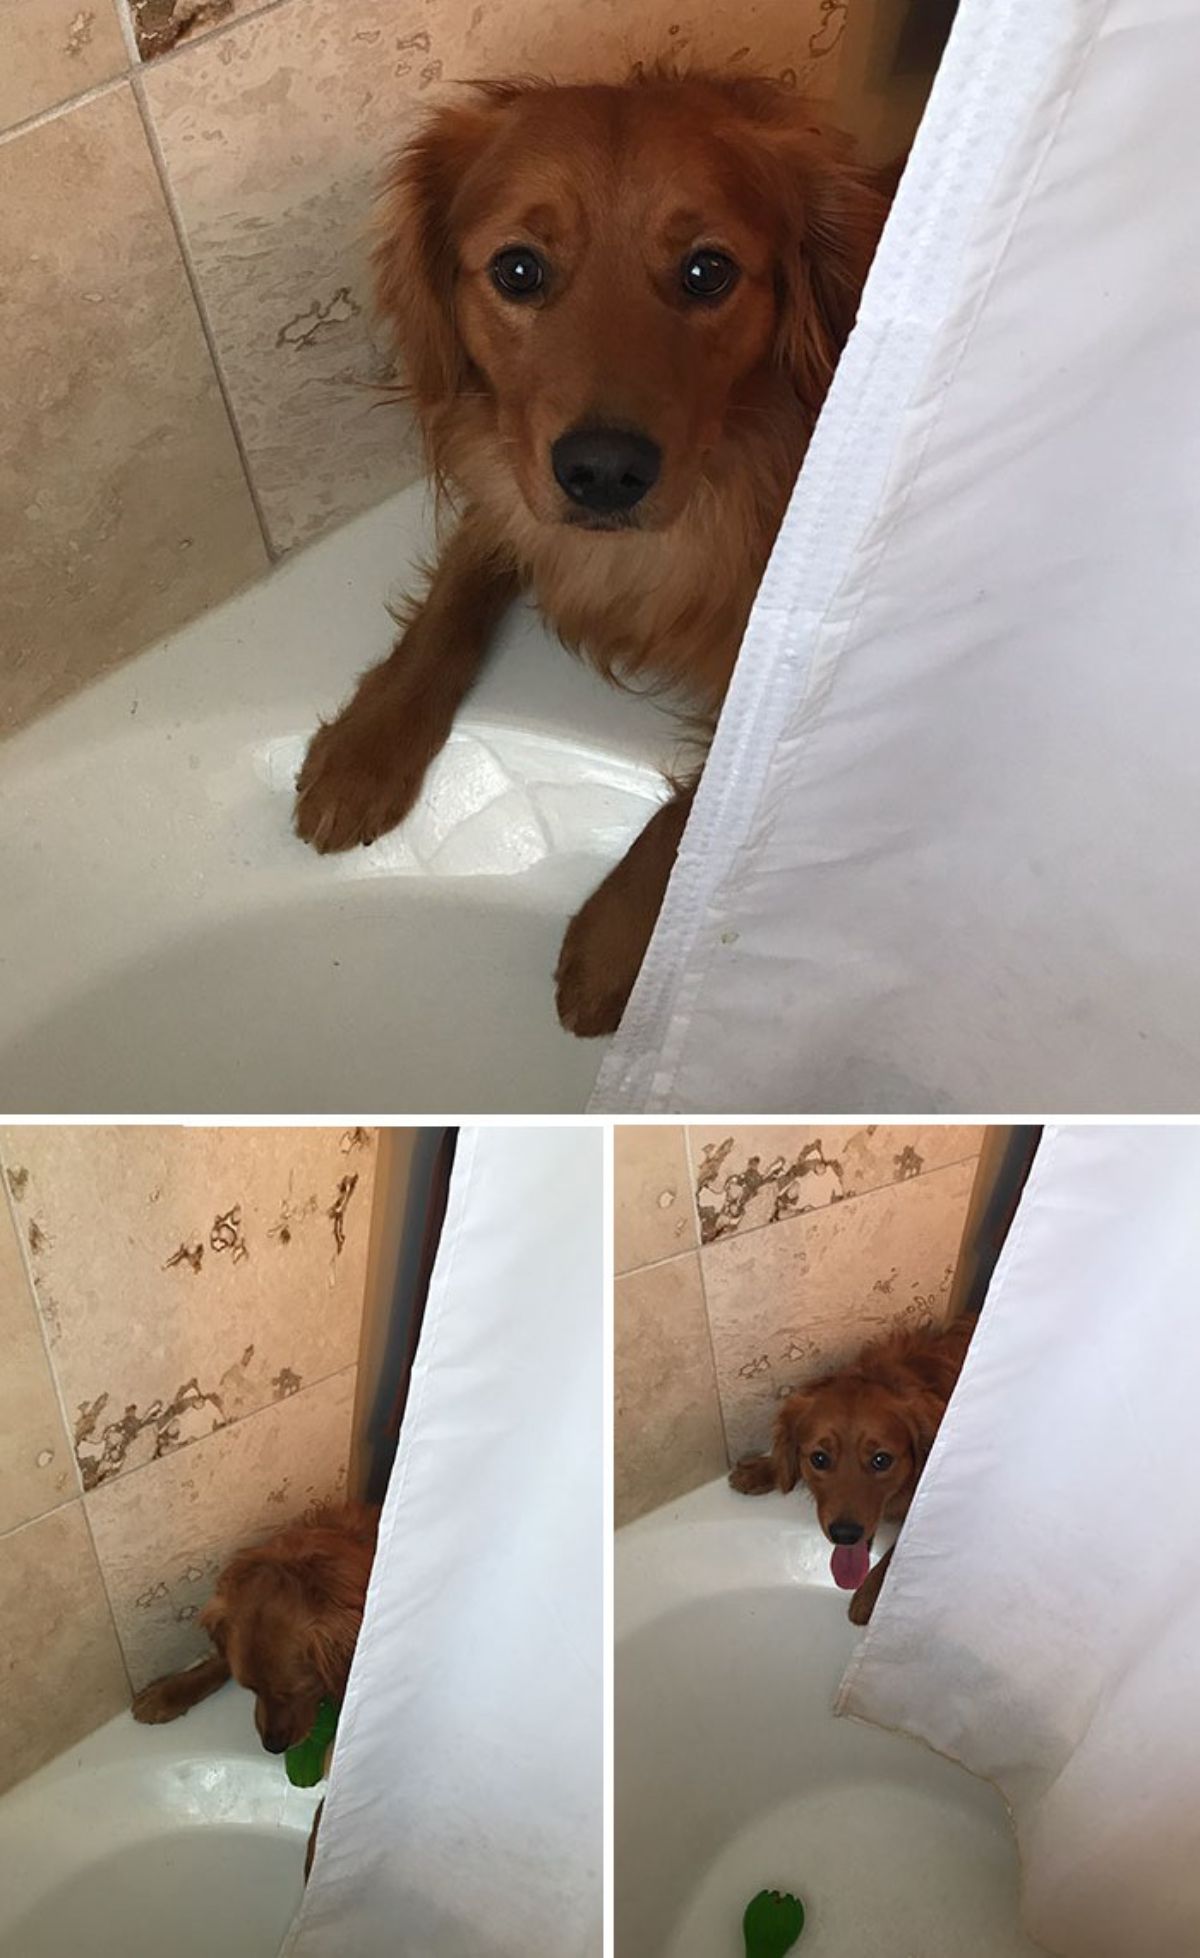 3 photos of a golden retriever peering around a white shower curtain into a white bath and dropping a toy into the tub